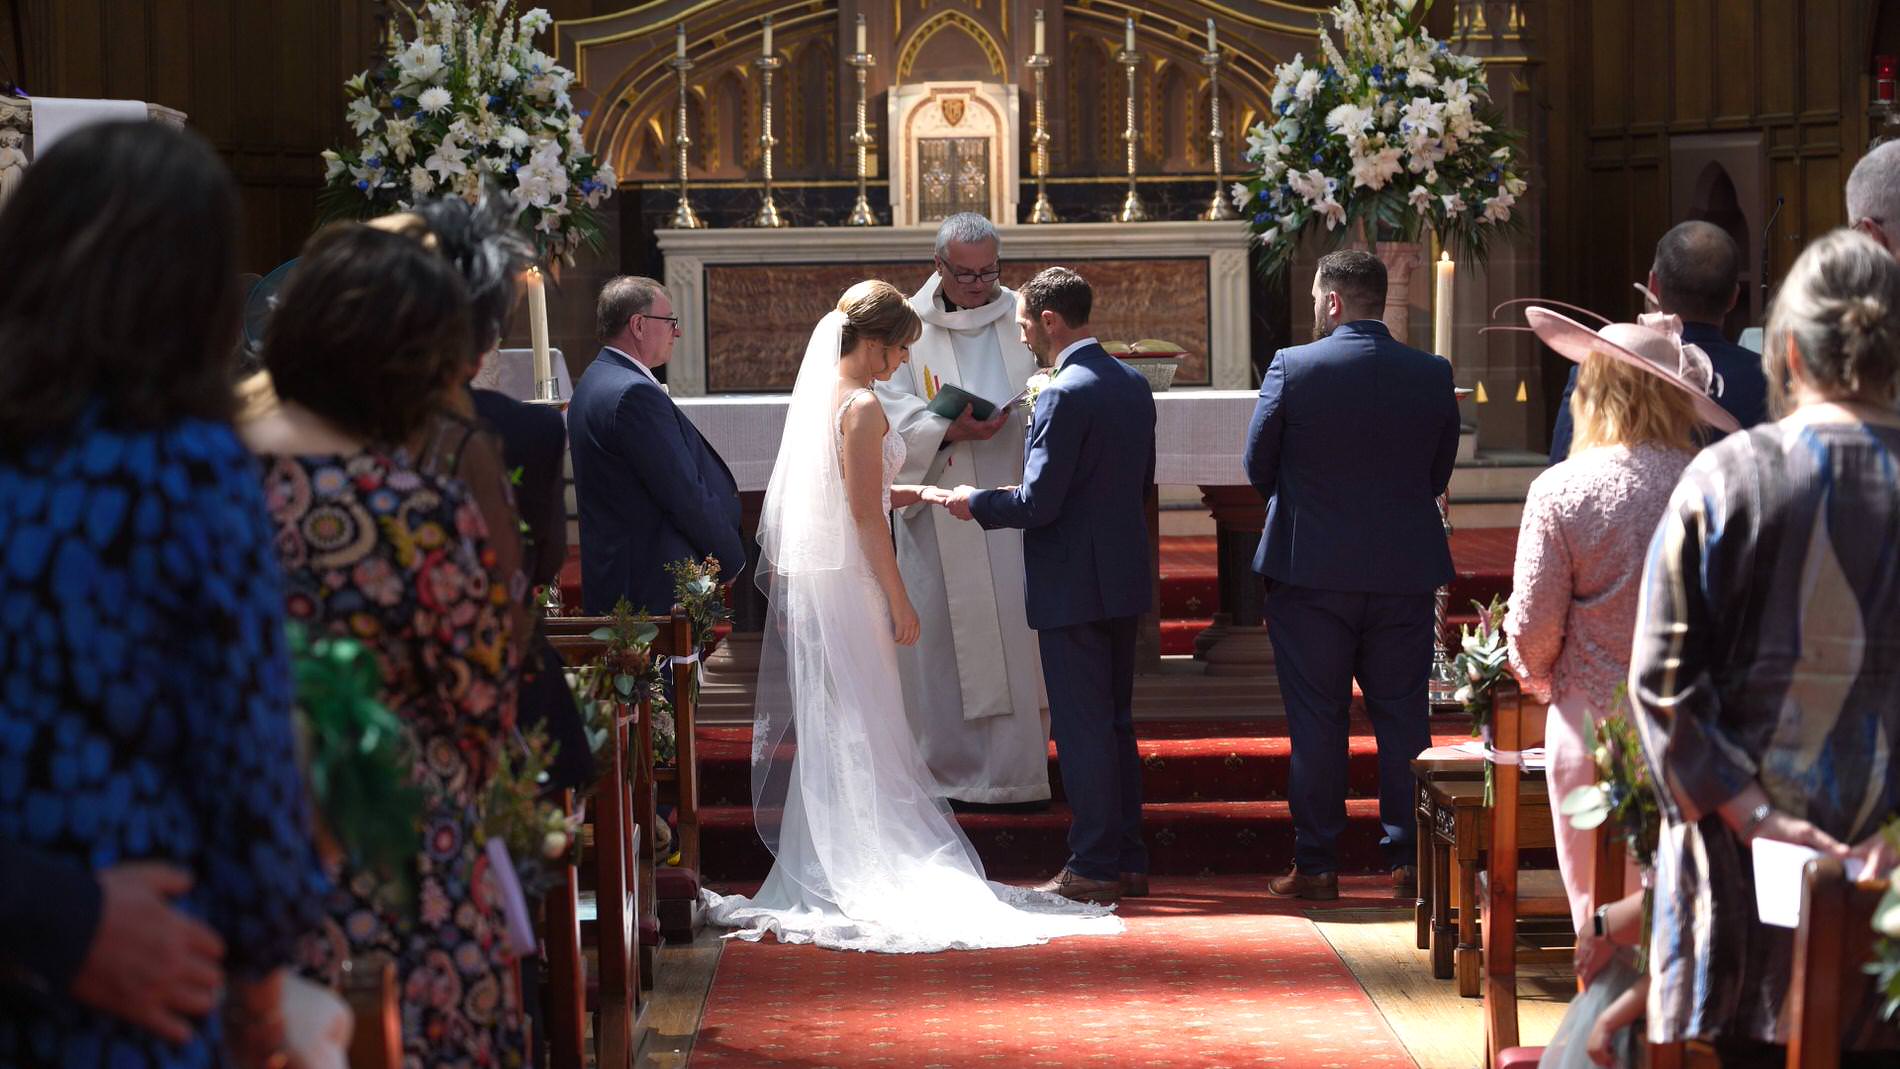 rings exchanged during ceremony at St Werburgh's Church chester